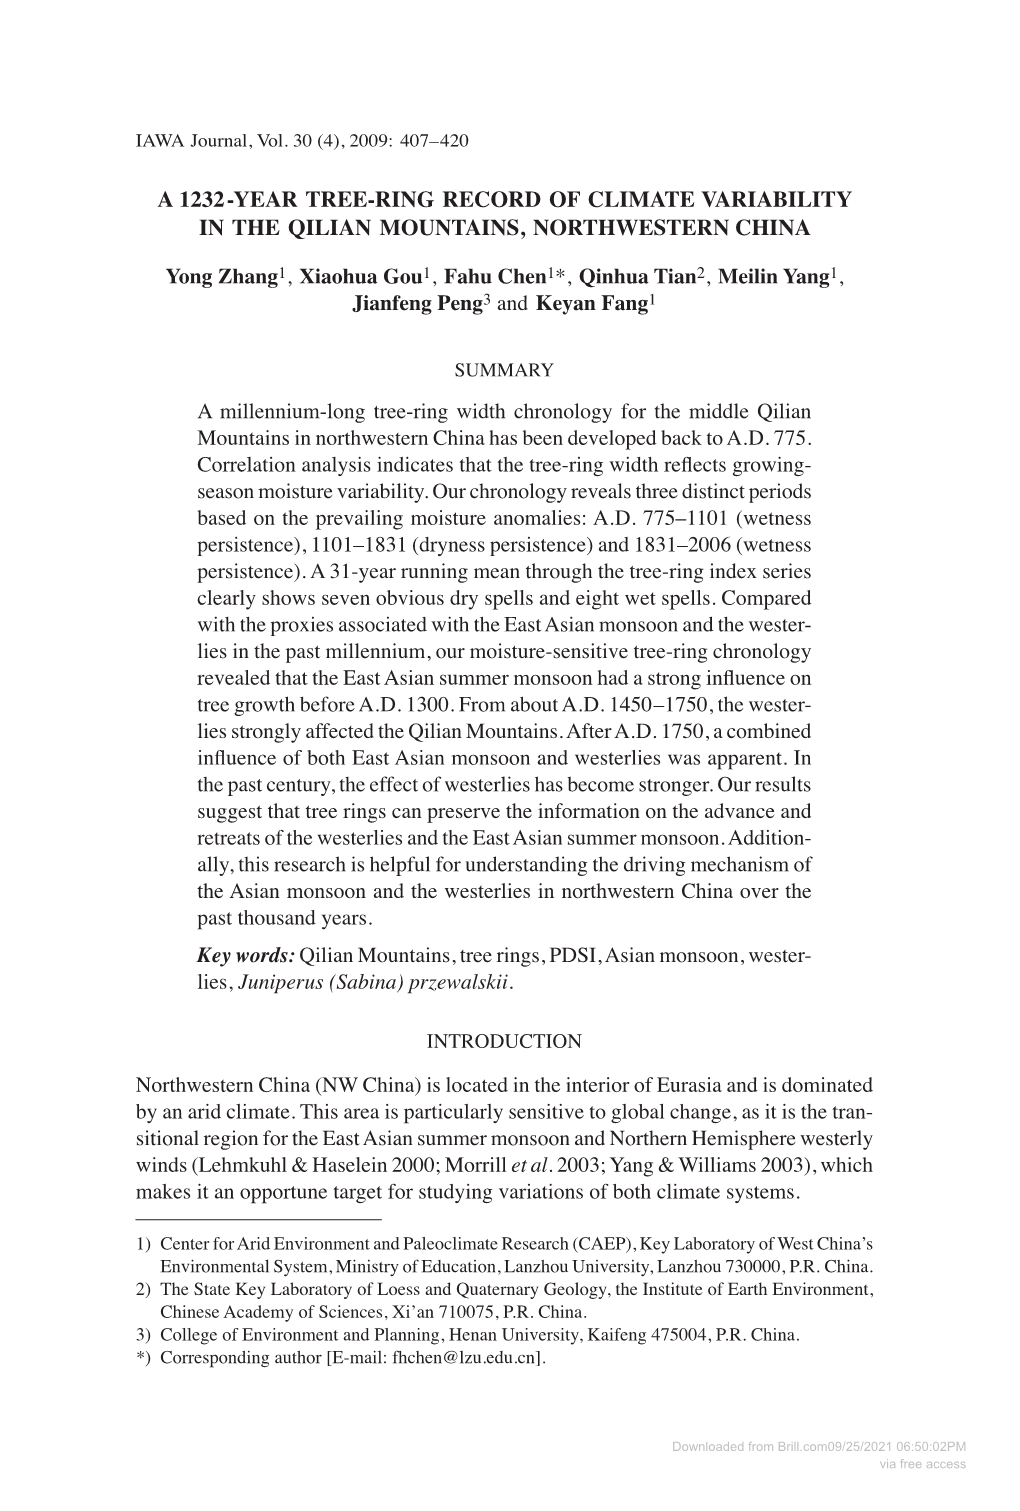 A 1232-Year Tree-Ring Record of Climate Variability in the Qilian Mountains, Northwestern China